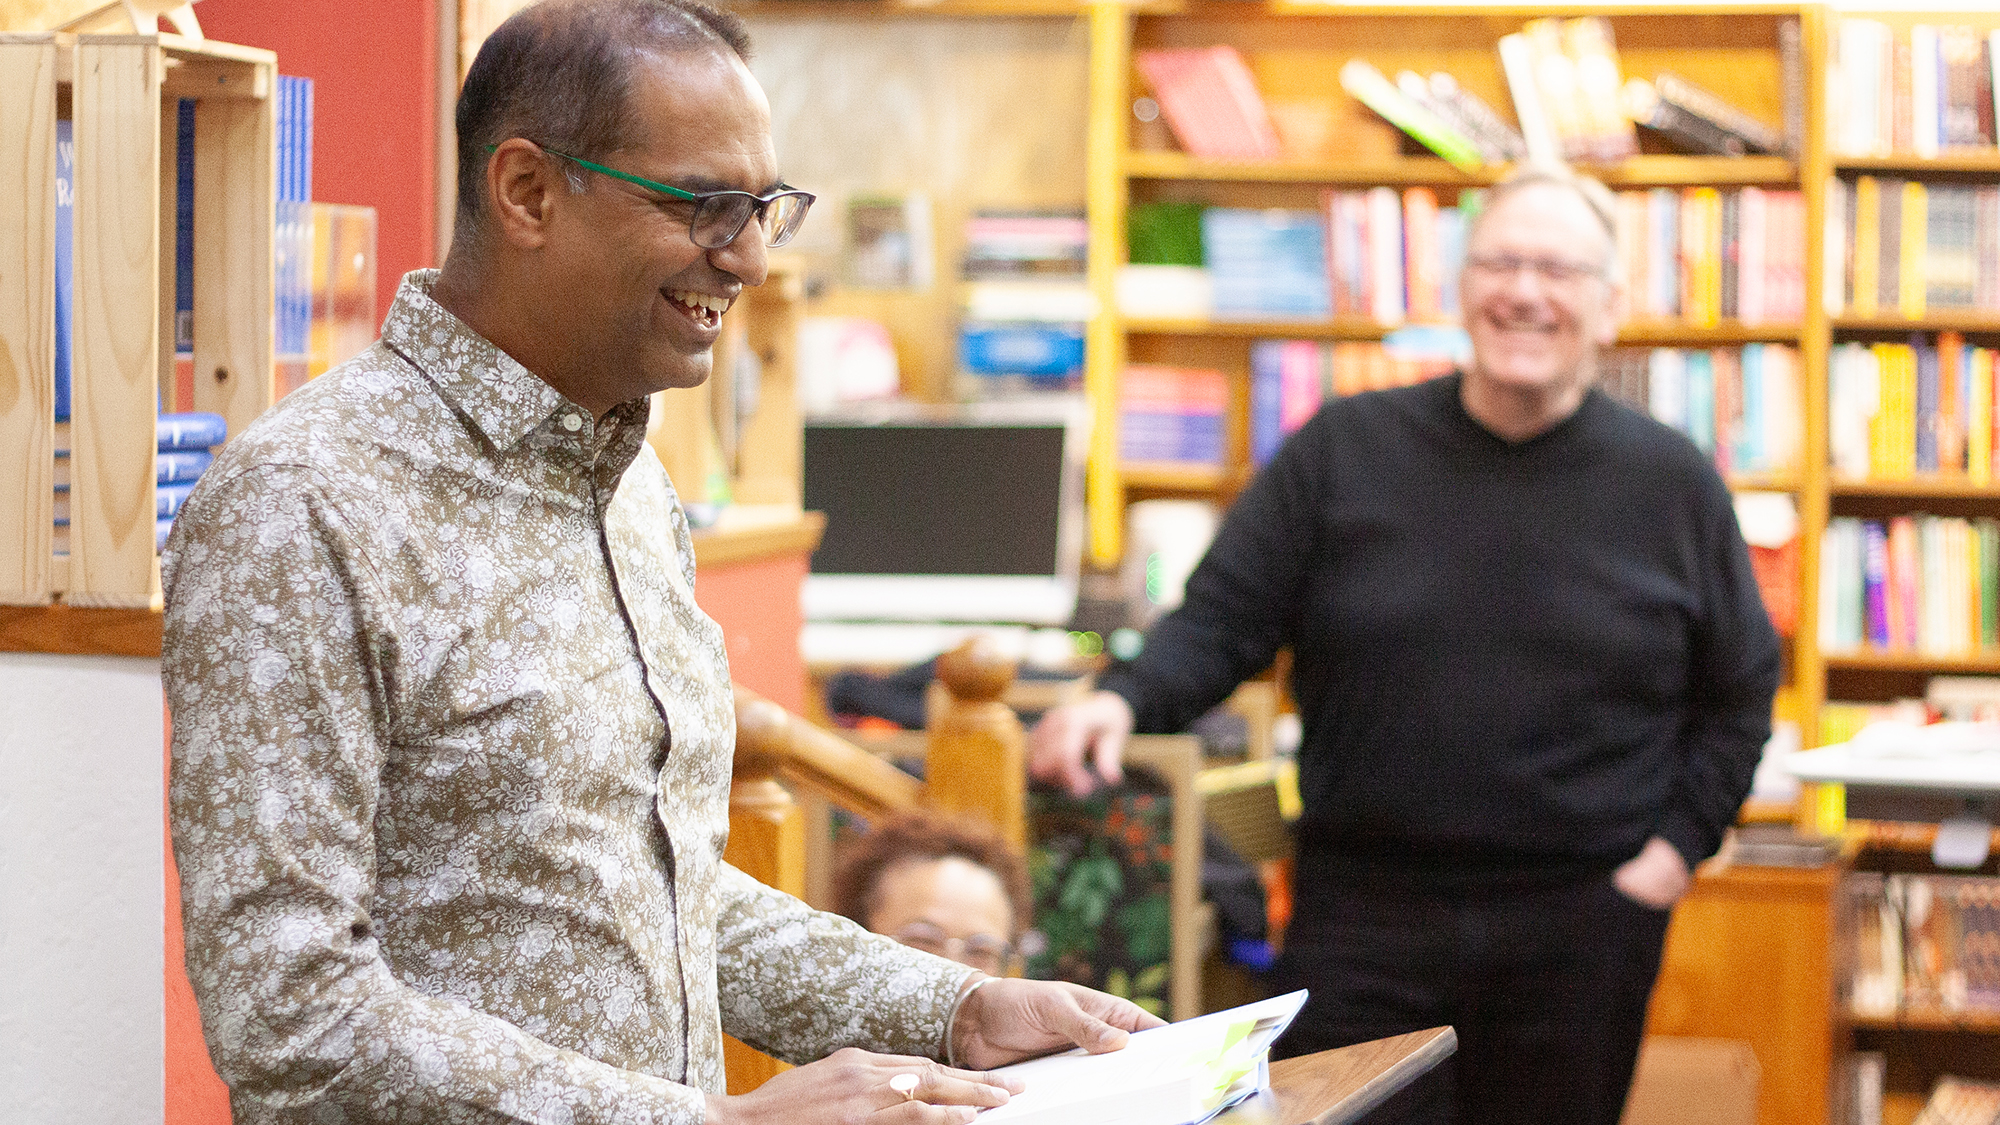 Ranganath at the Avid Reader Bookstore in downtown Davis for a reading and book signing. (Alex Russel / UC Davis)